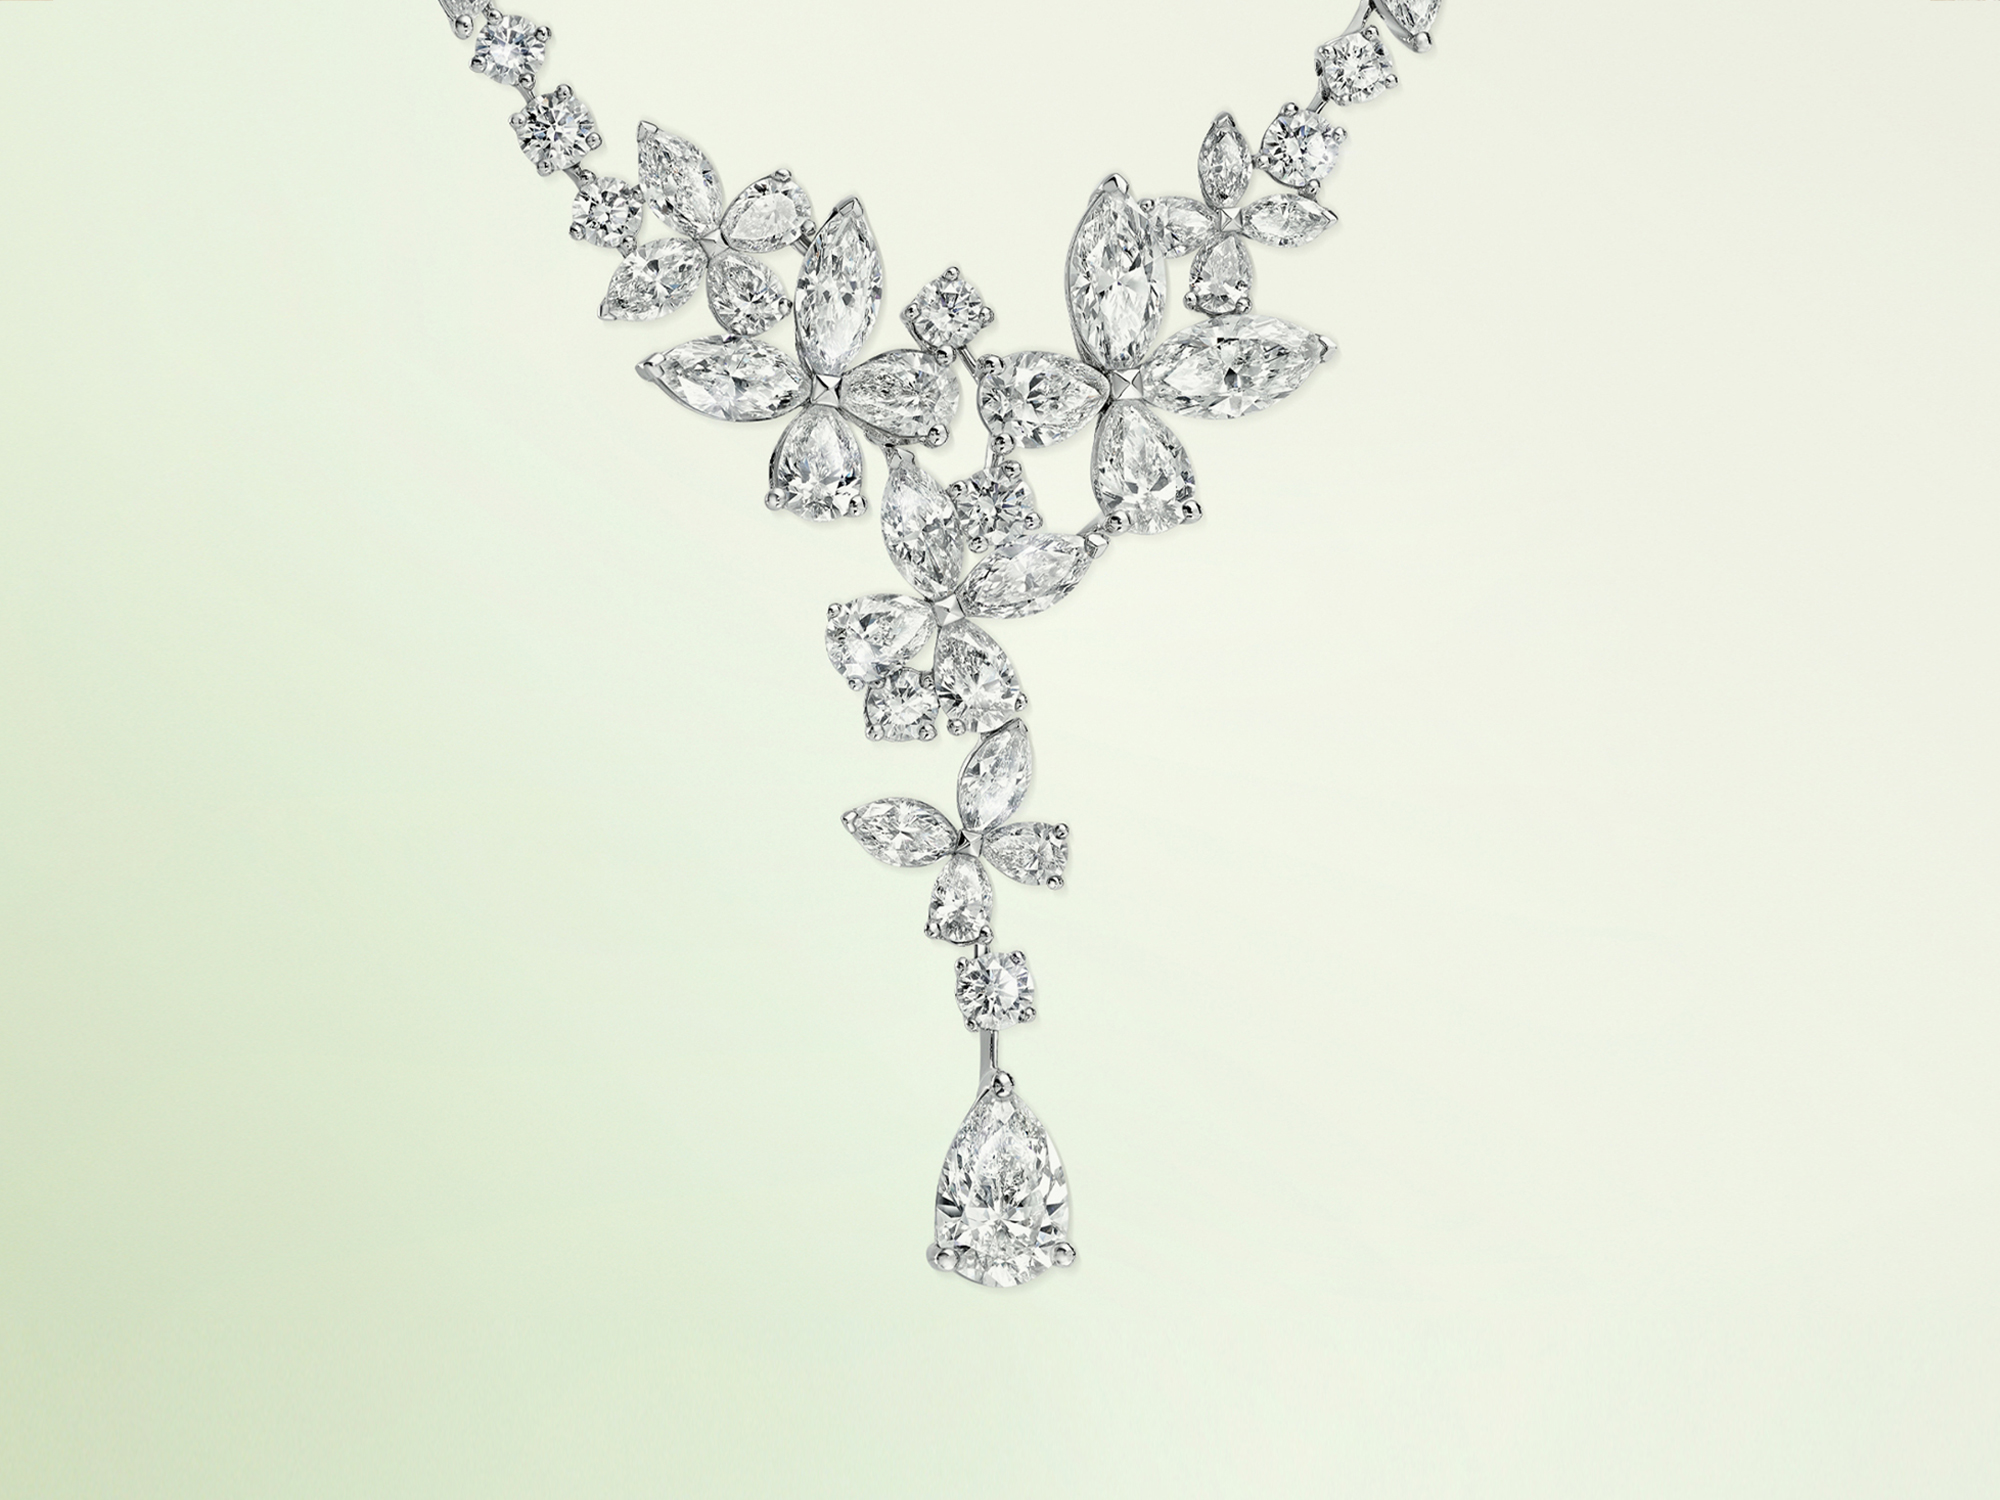 Graff Classic Butterfly Diamond Necklace from the Graff jewellery collection